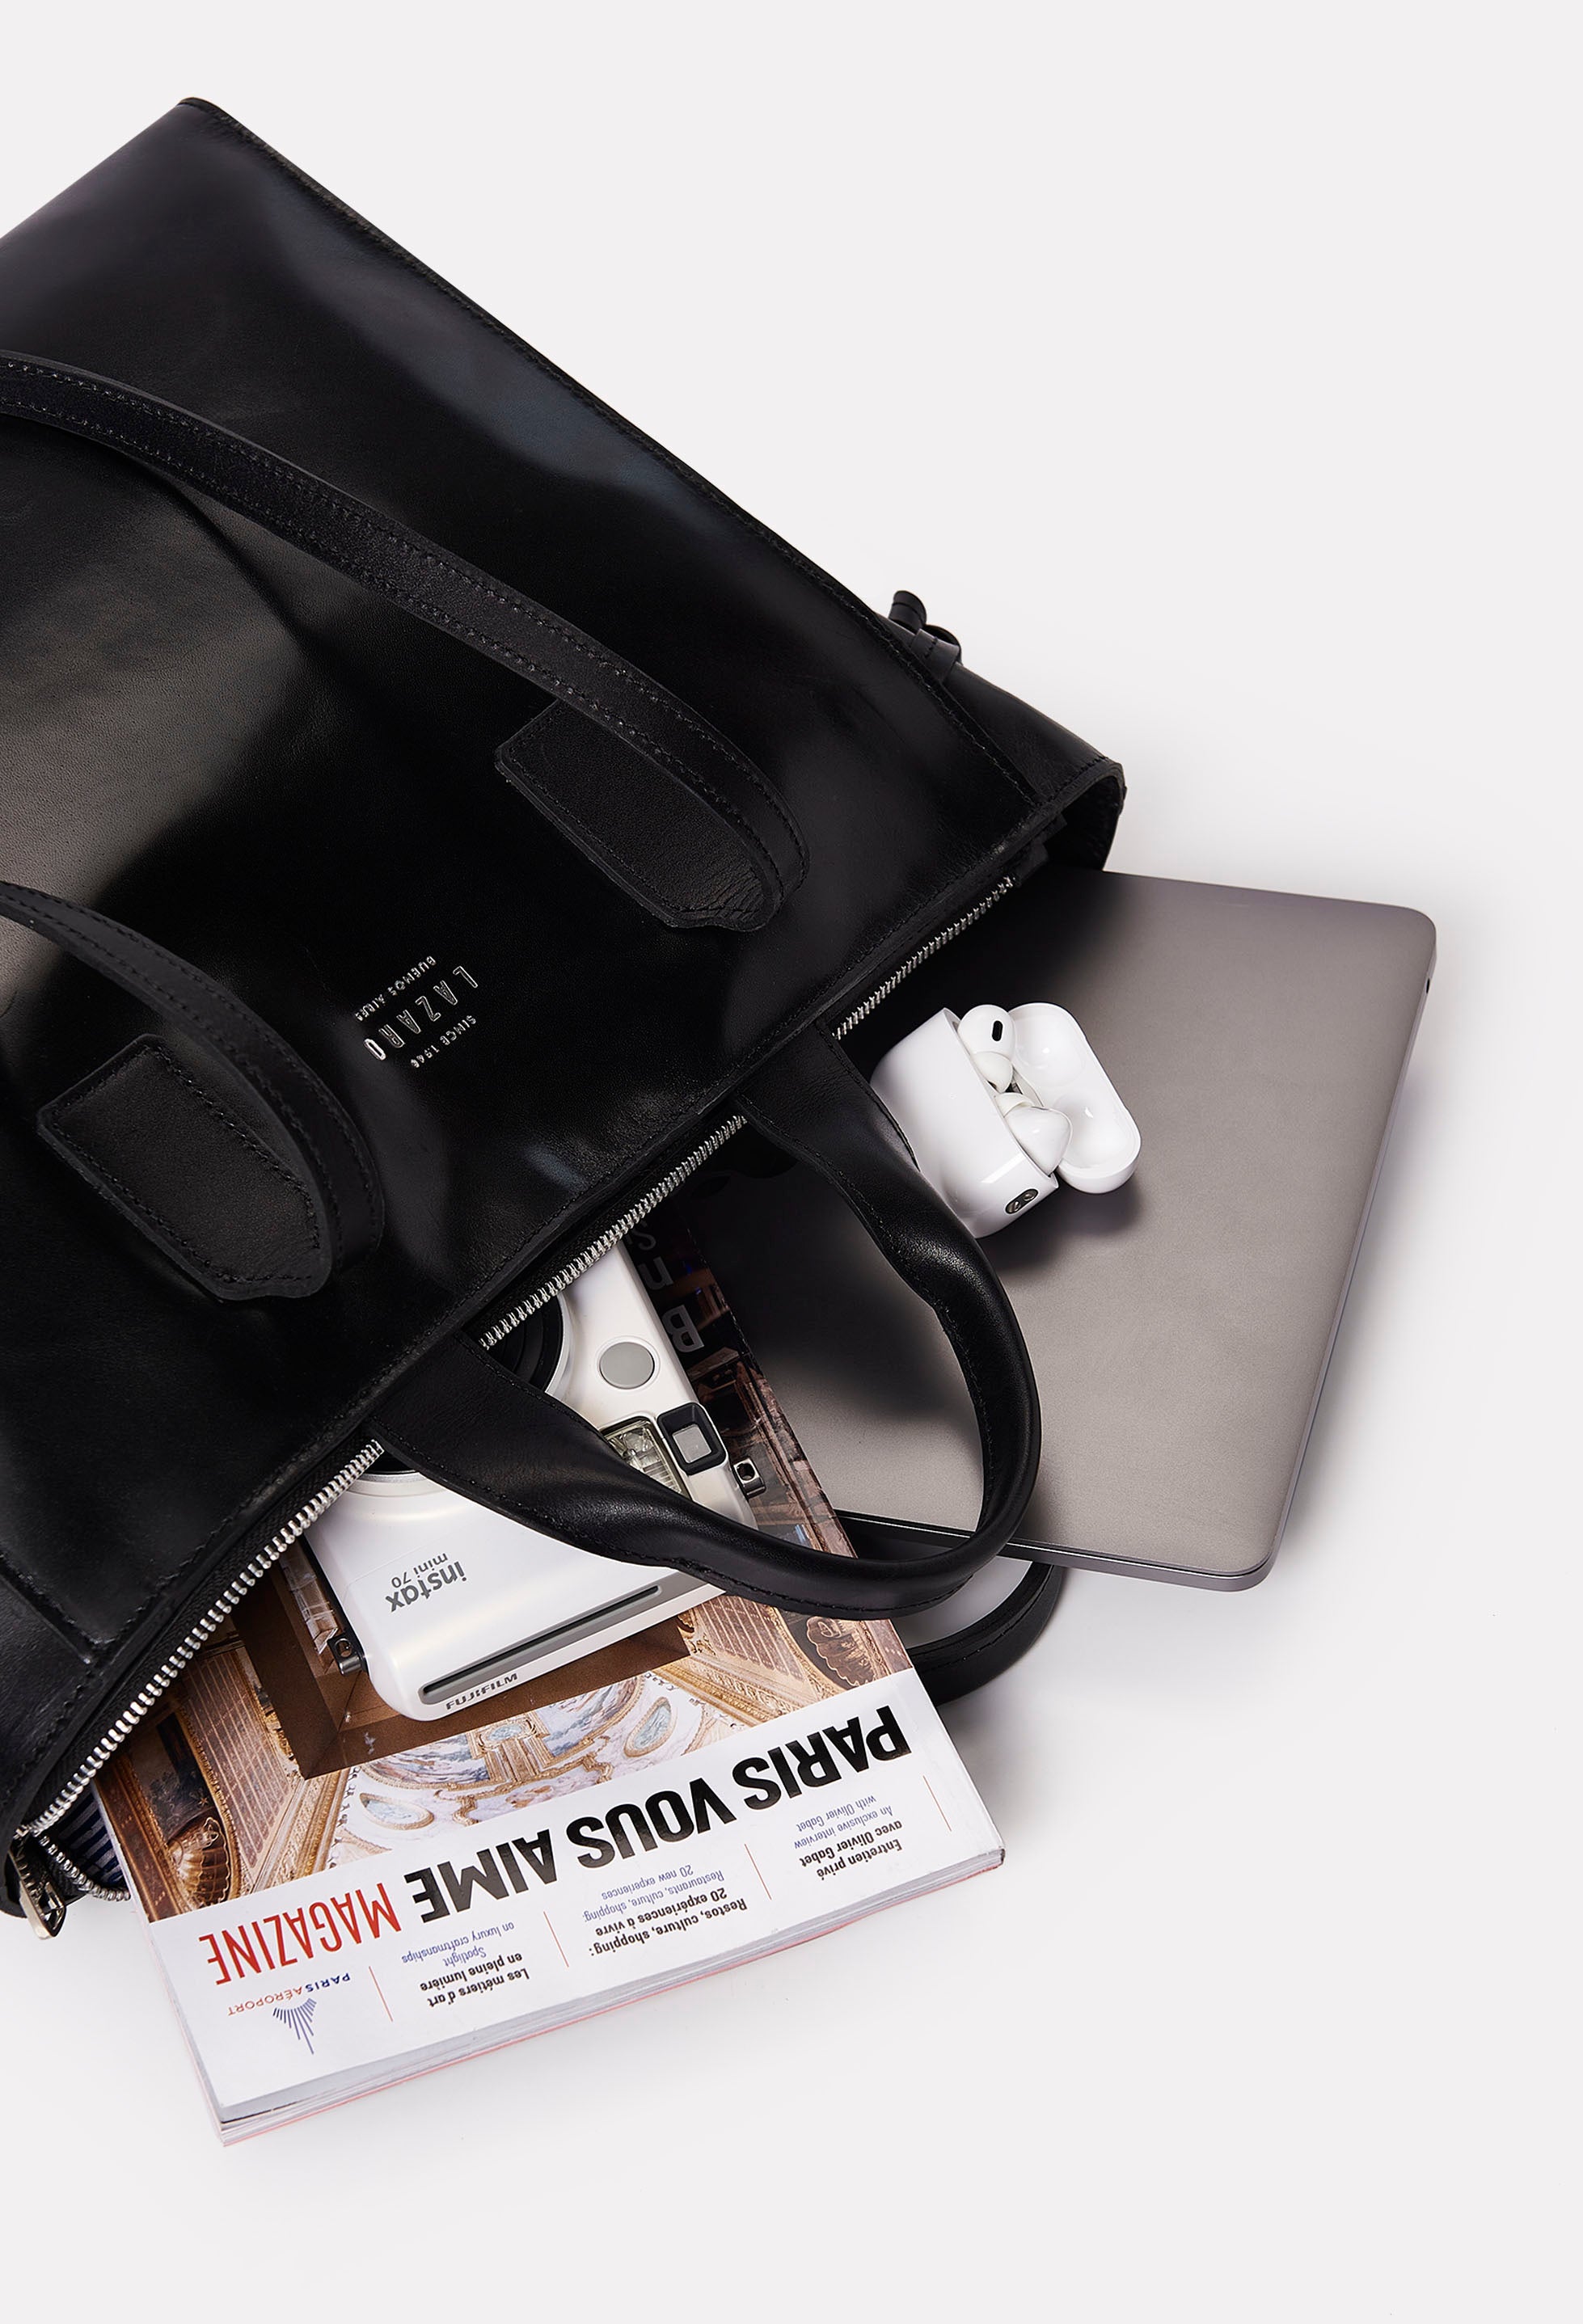 Interior of a Black Leather Tote Bag Lambro that shows the bag packed with a computer, a camera, a magazine and a earphones.